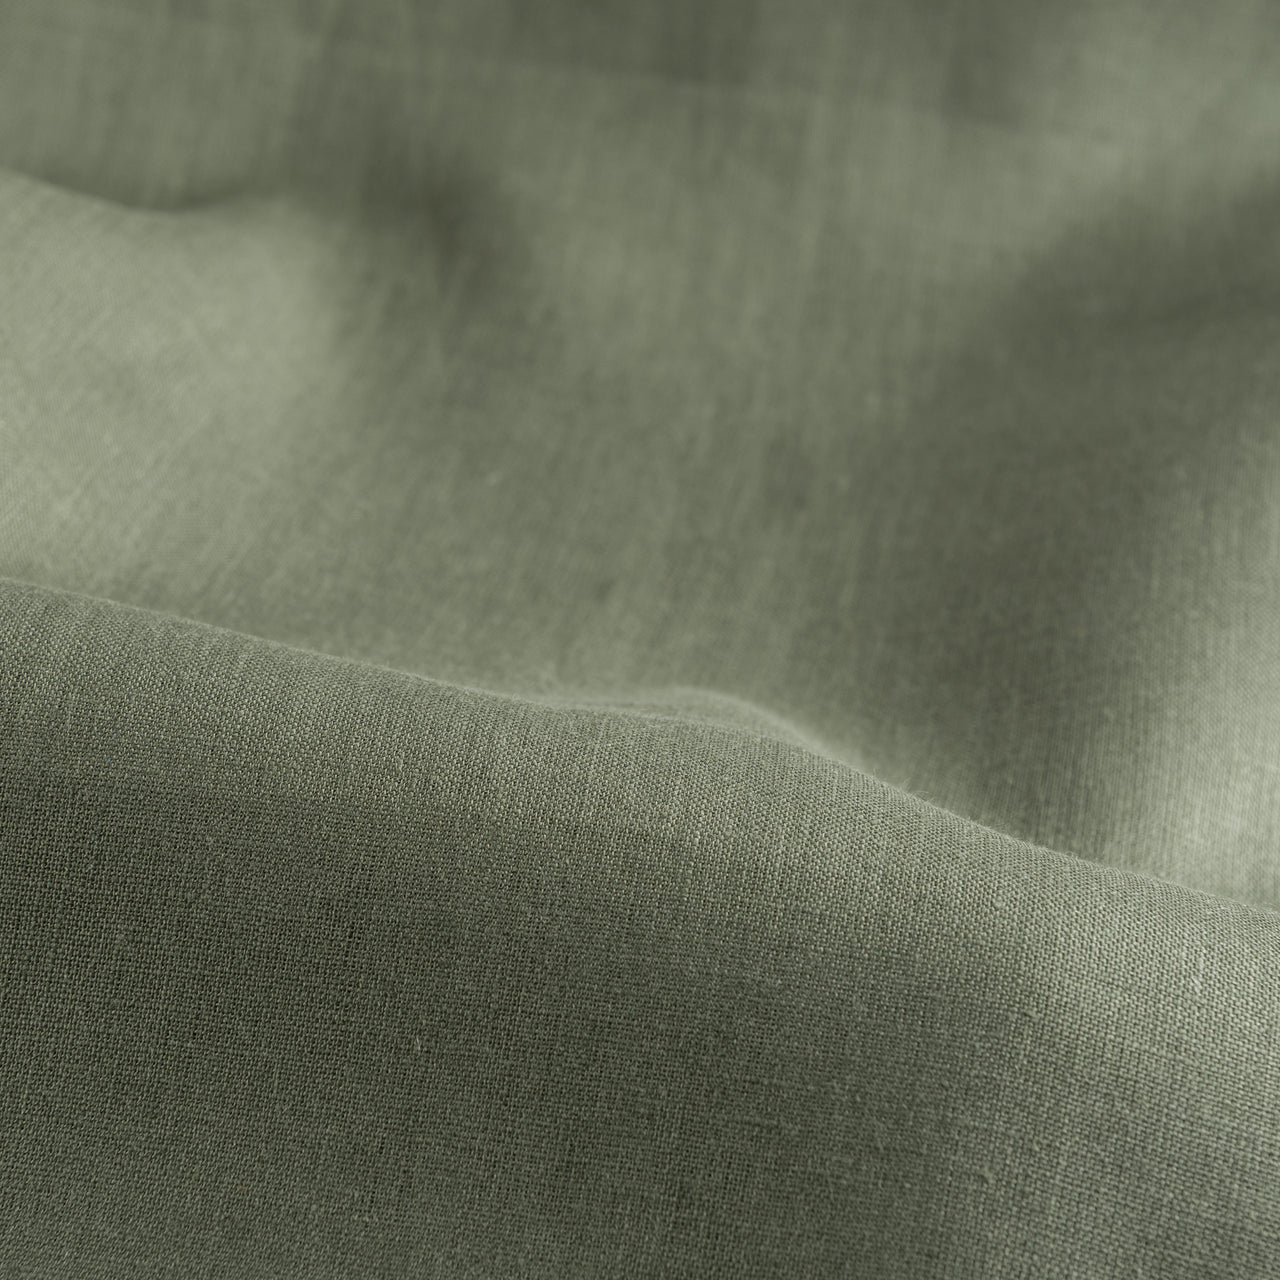 Sage Green Linen Fabric by the Meter - 100% French Natural - Width 133 cm, 267 cm